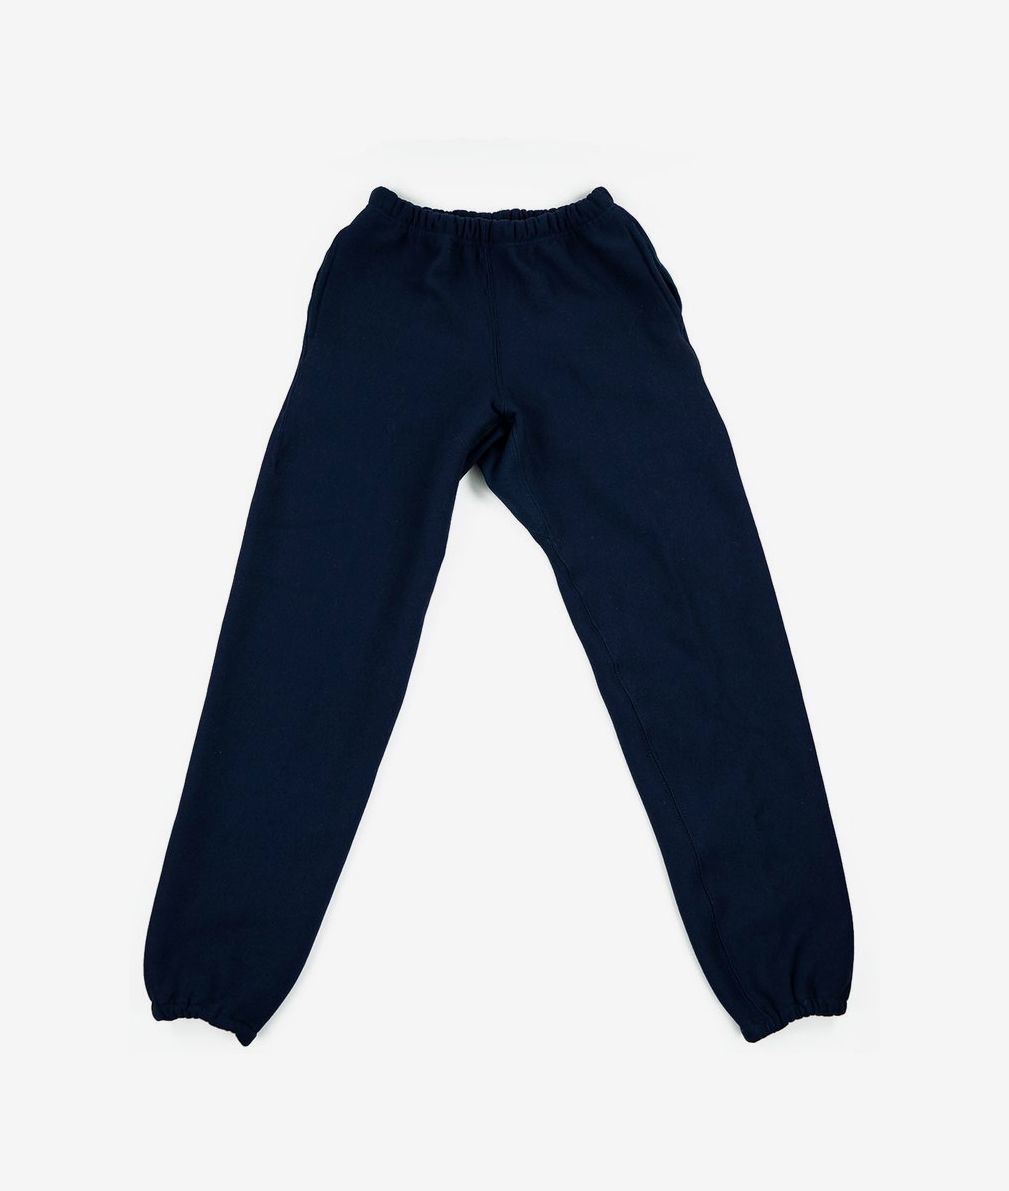 The 5 Best Budget Sweatpants of 2023